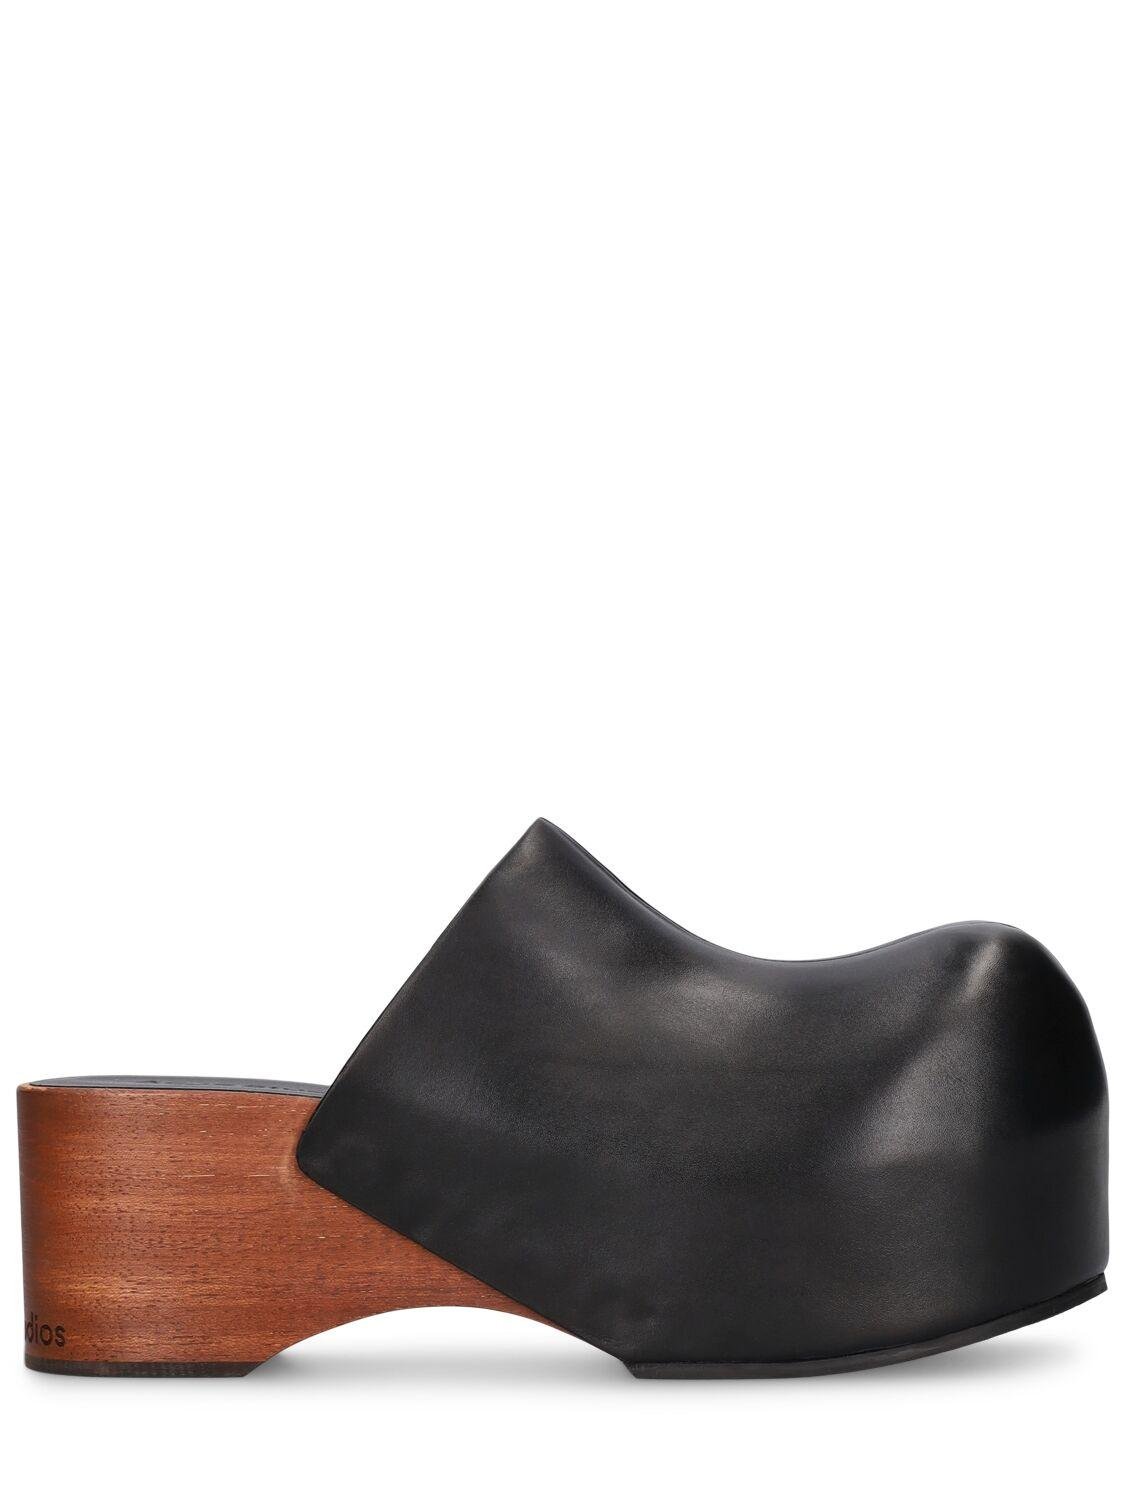 70mm Barlo Leather Clogs by ACNE STUDIOS